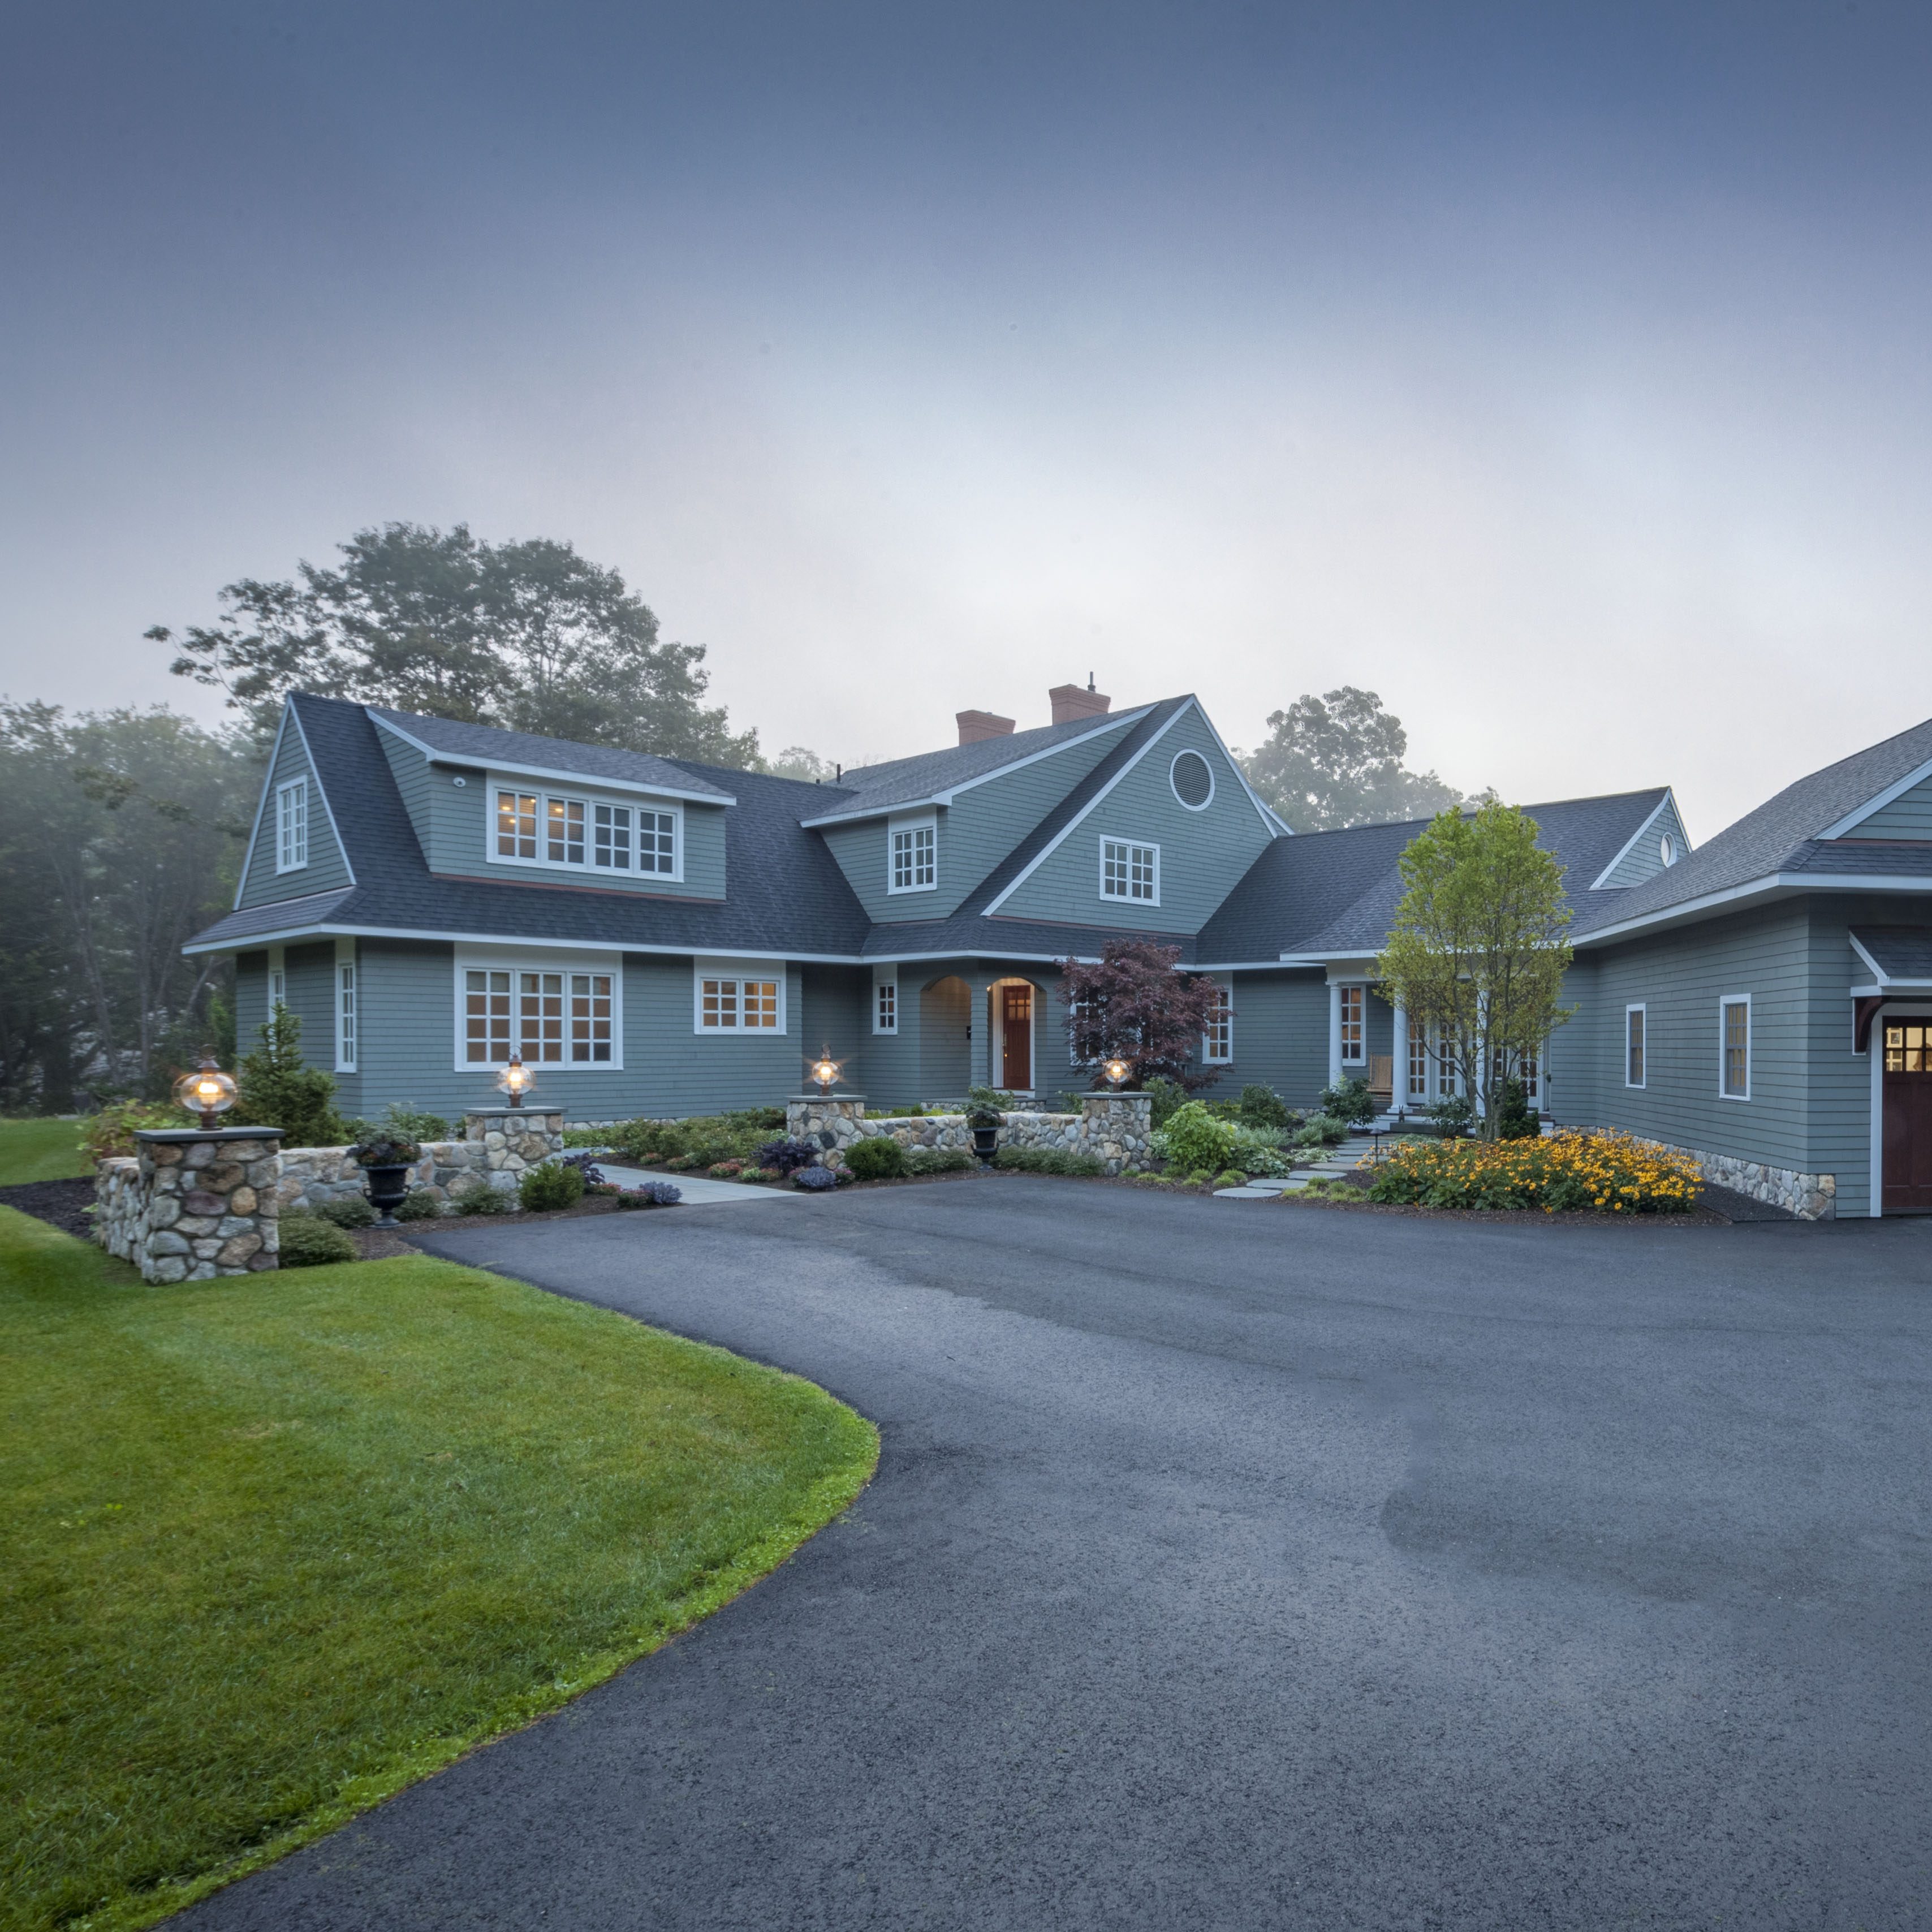 A large, two-story blue home with white trim and a driveway, surrounded by lush landscaping, during a misty evening.